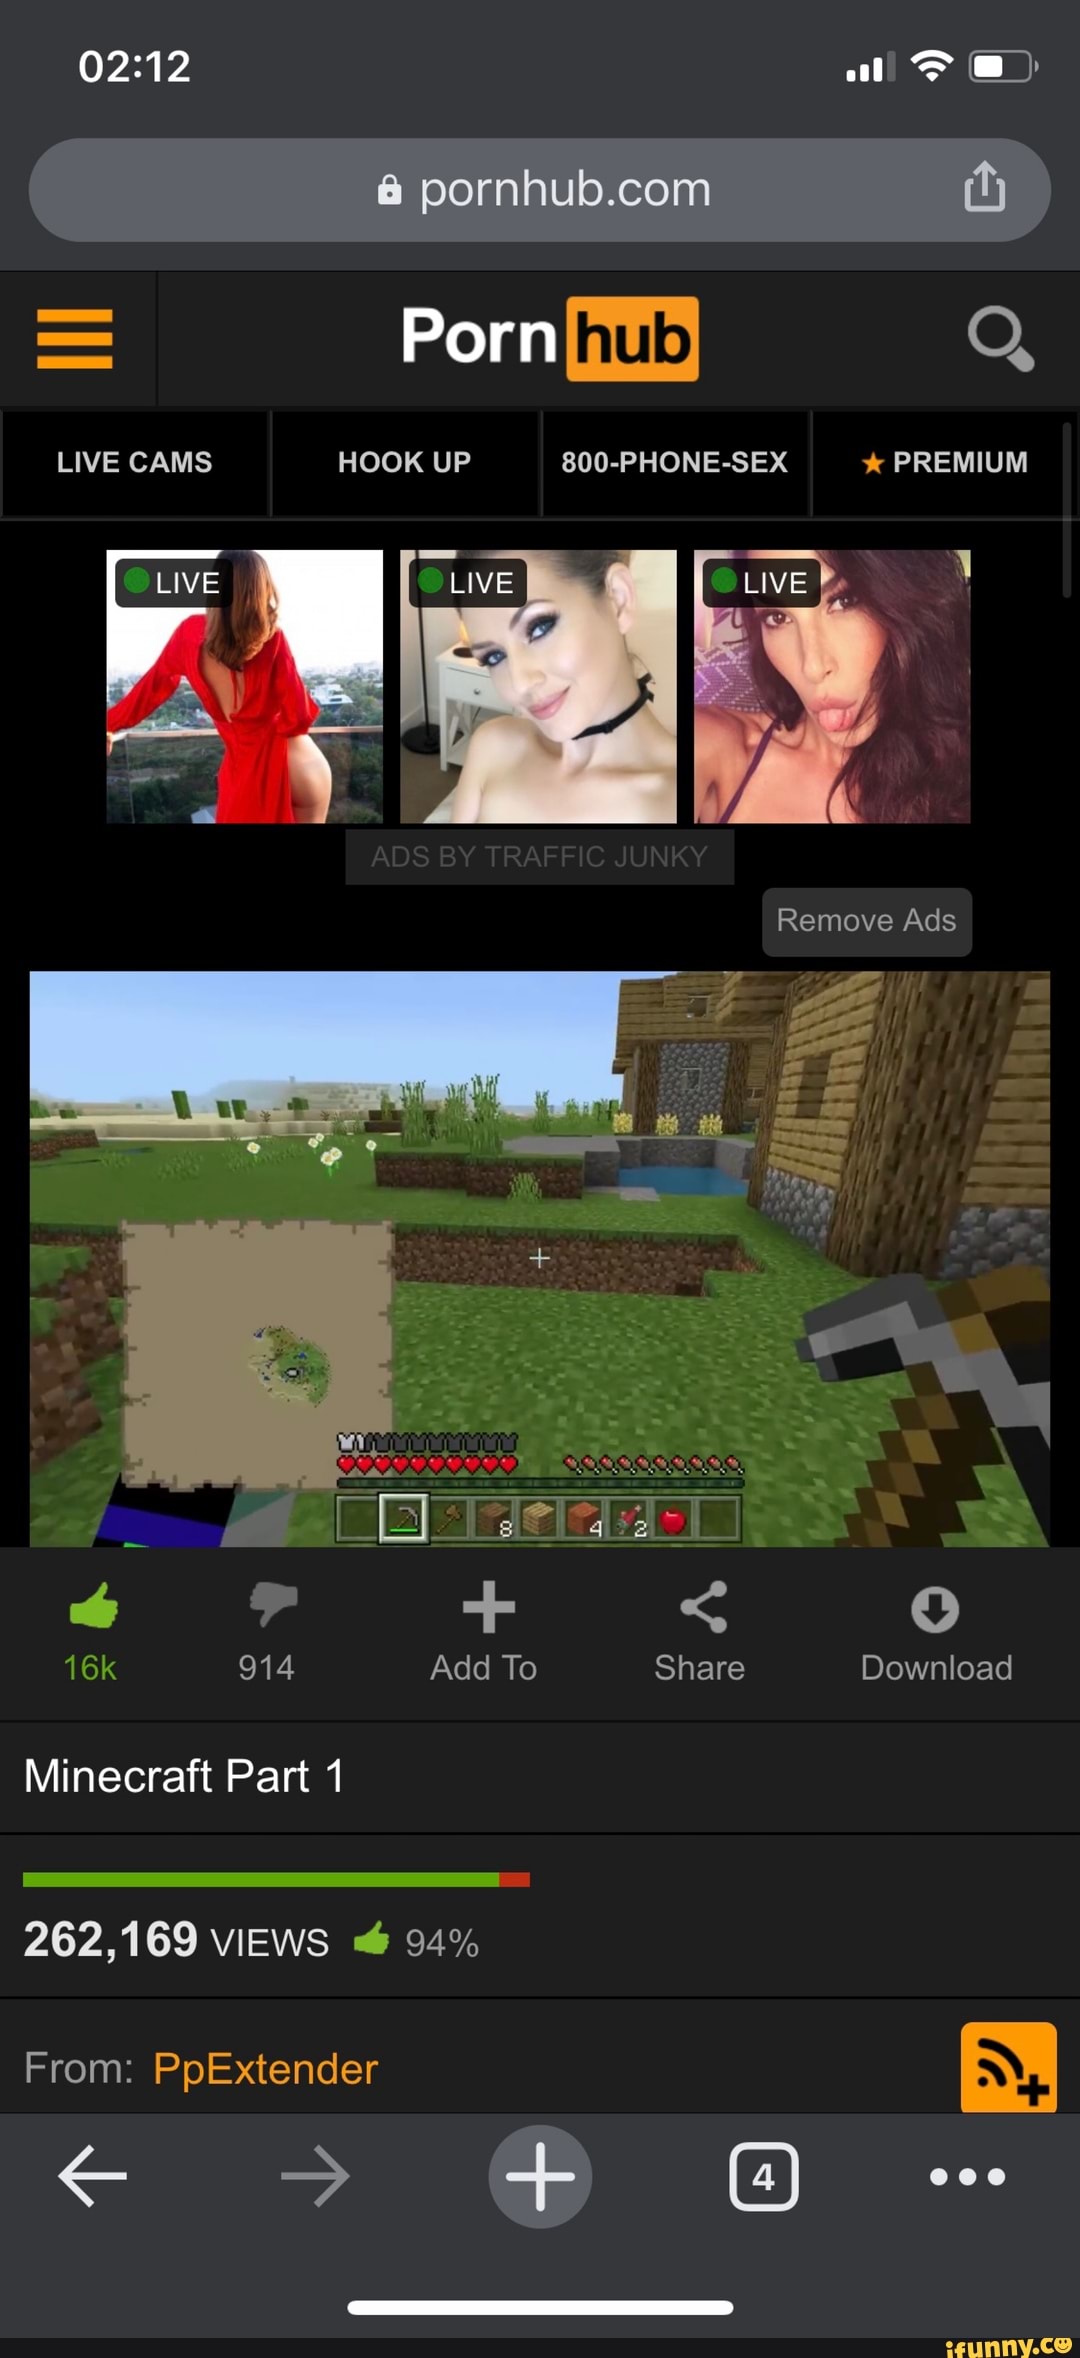 1080px x 2358px - Porn) HOOK UP 800-PHONE-SEX LIVE CAMS Share Add To Minecraft Part 1 262,169  VIEWS @ 94% From: PpExtender * PREMIUM Remove Ads Download - iFunny Brazil